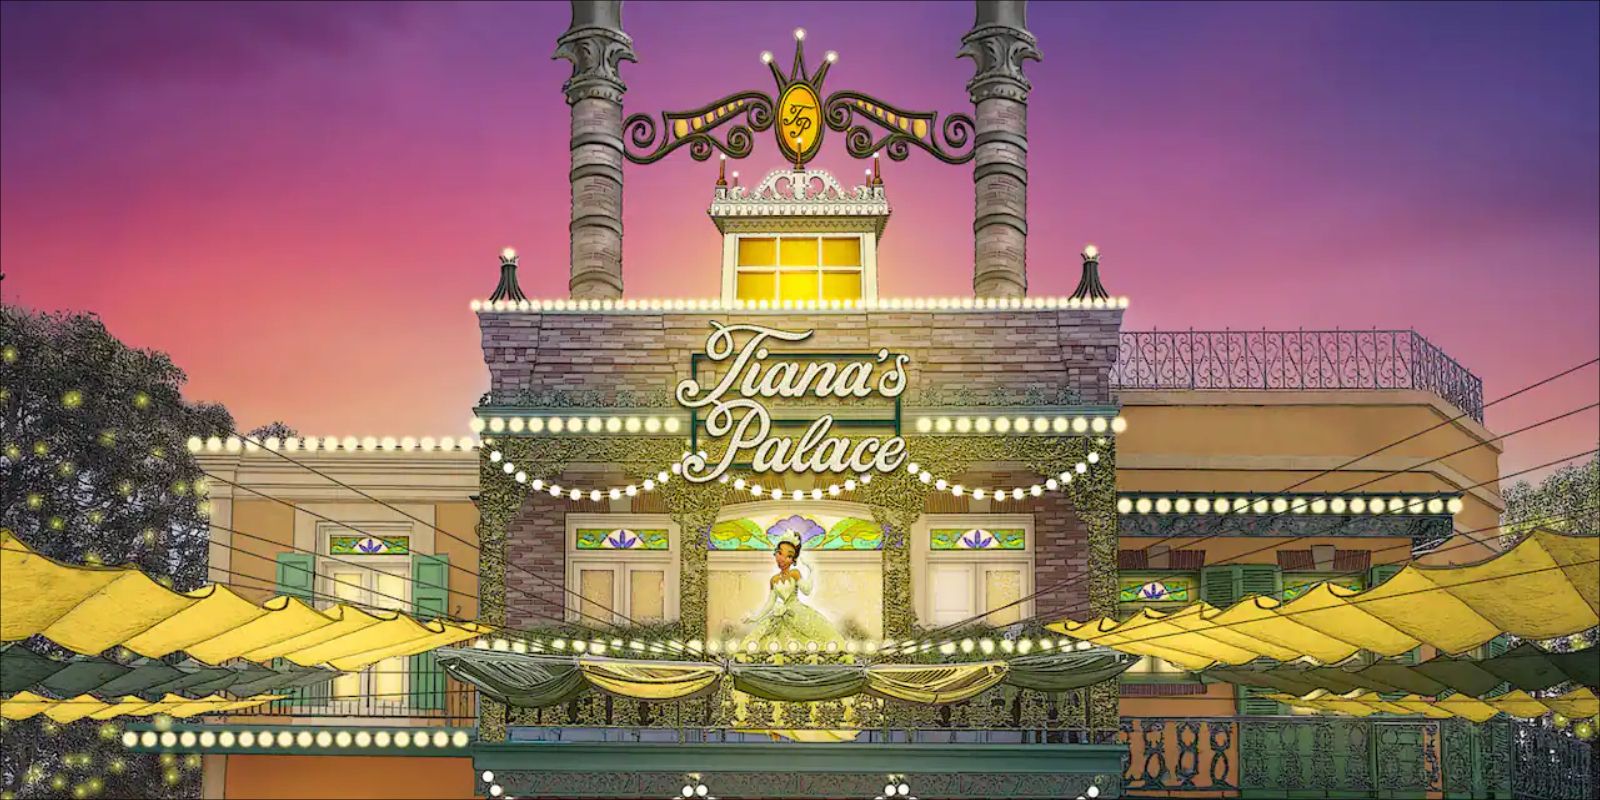 Concept art for the Tiana's Palace restaurant at Disneyland